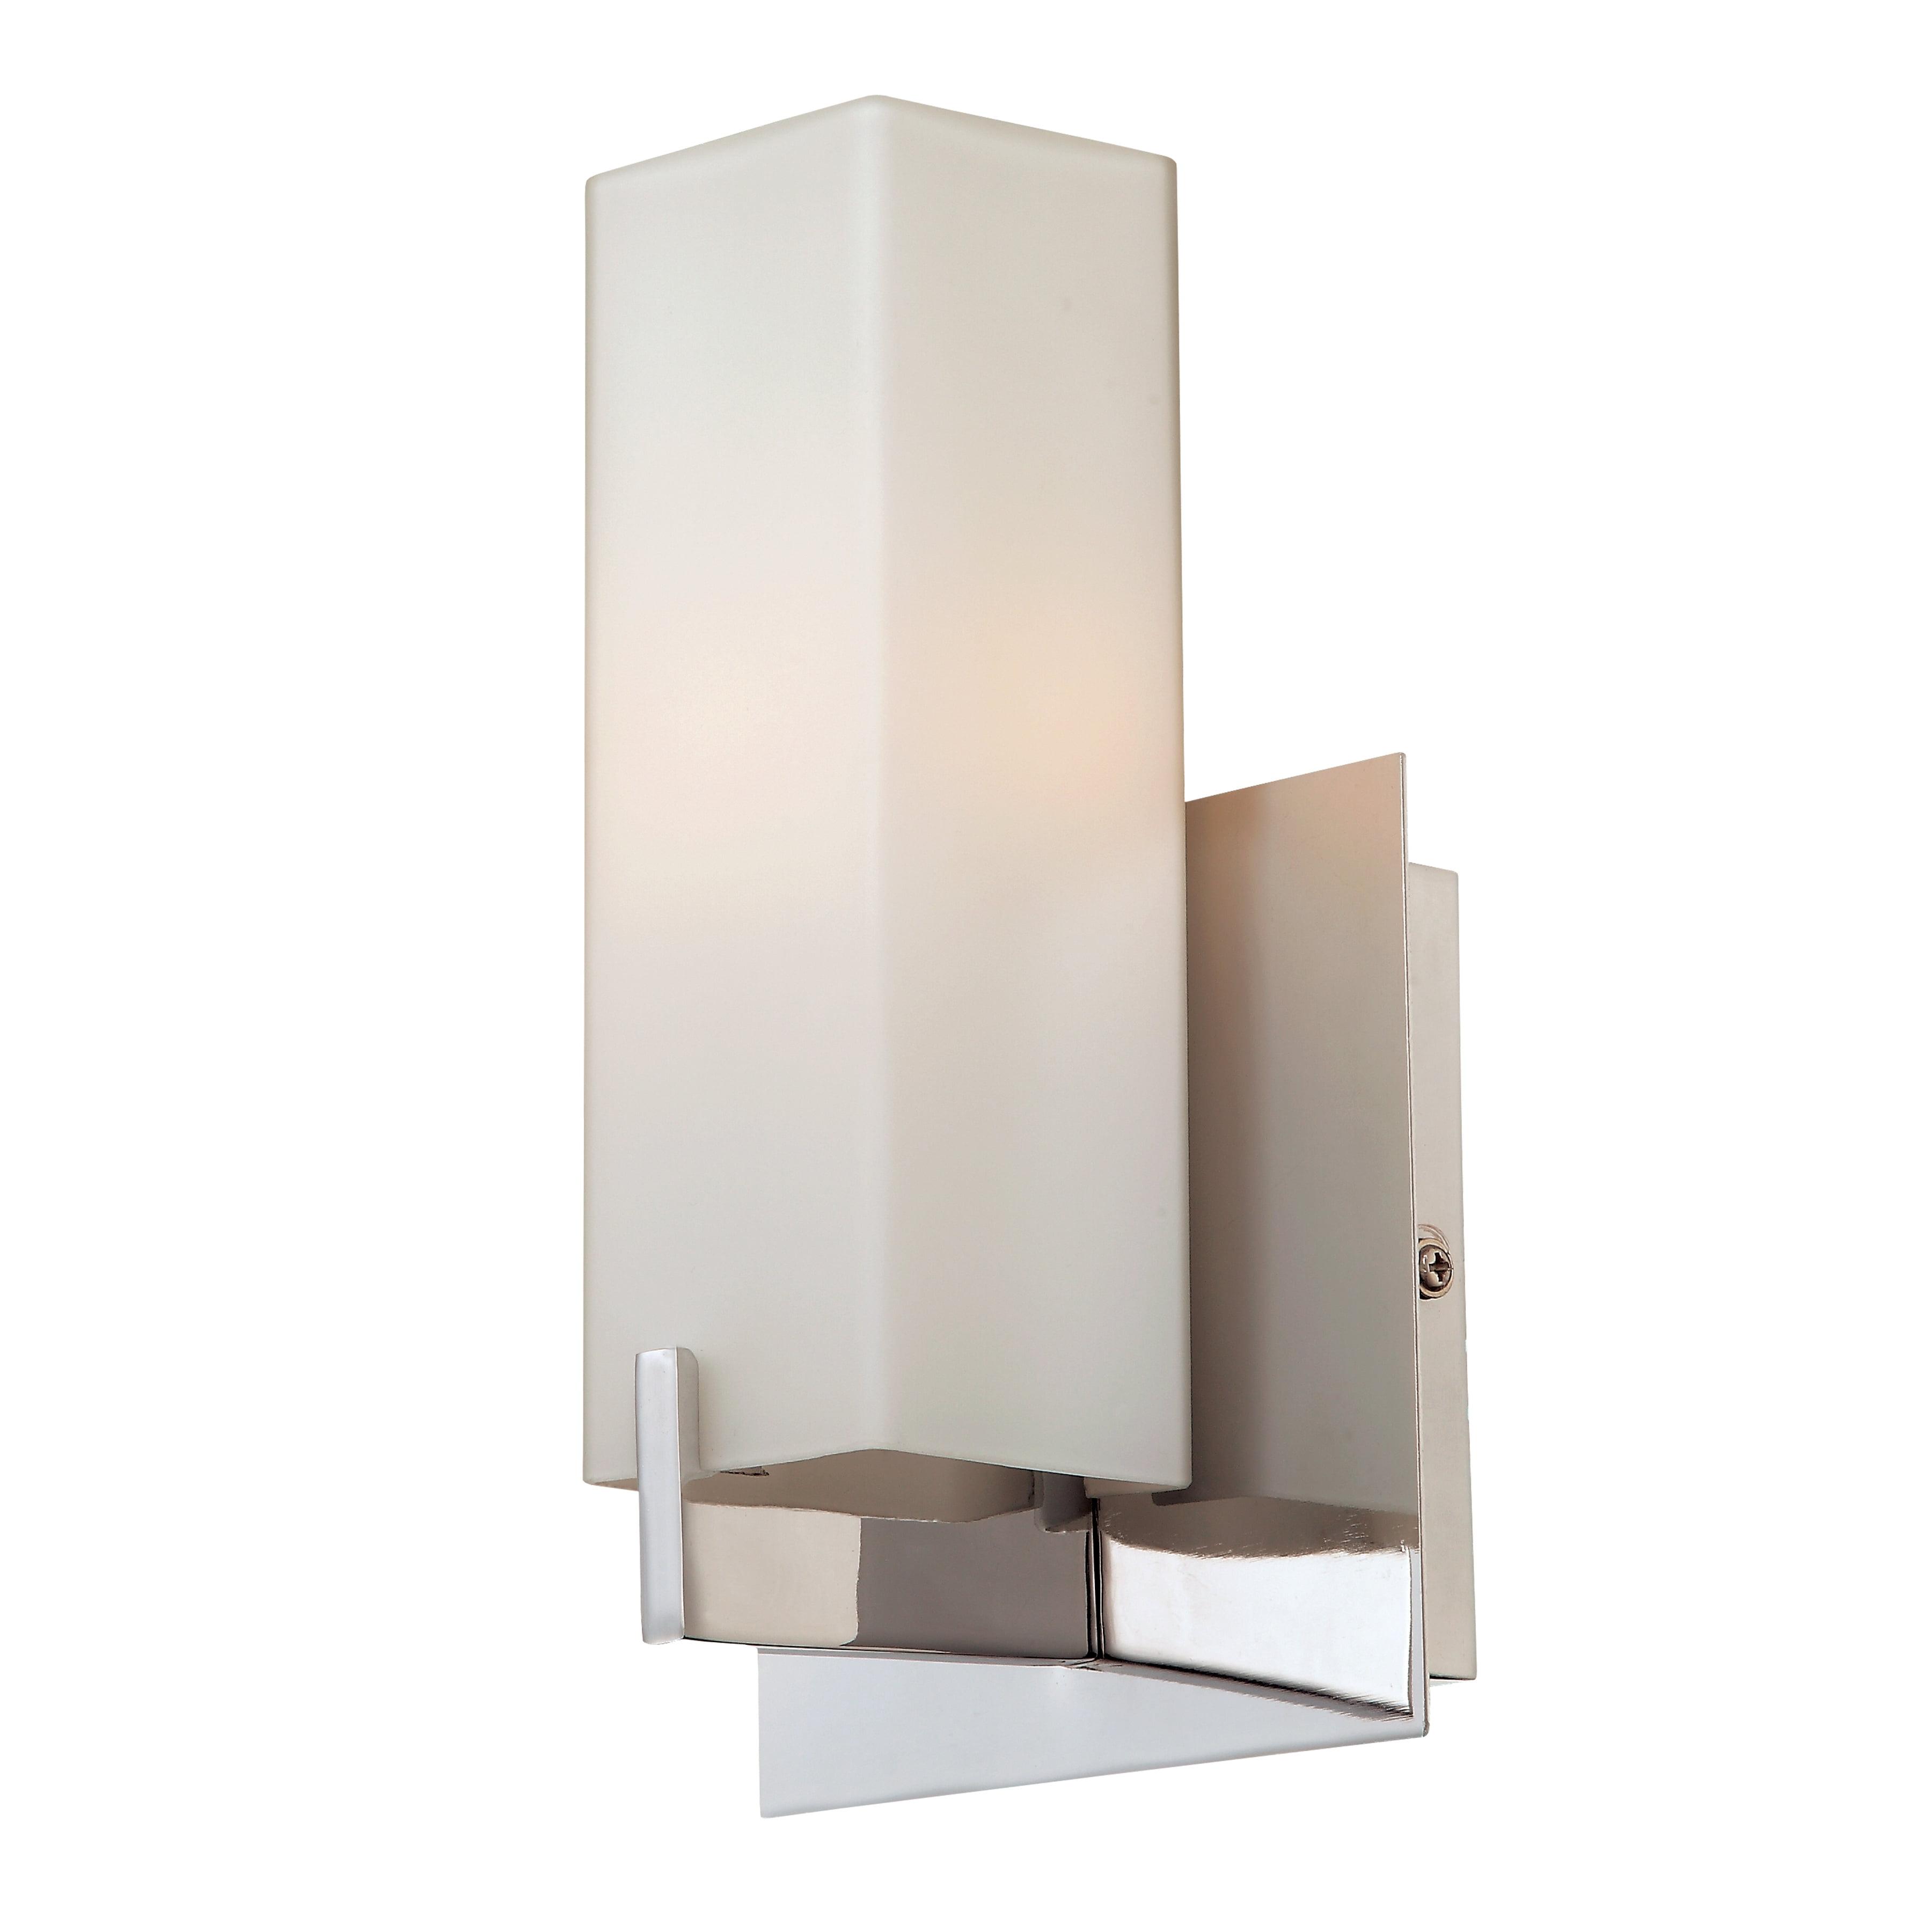 Moderno 8.3'' Matte Satin Nickel Wall Sconce with White Opal Glass